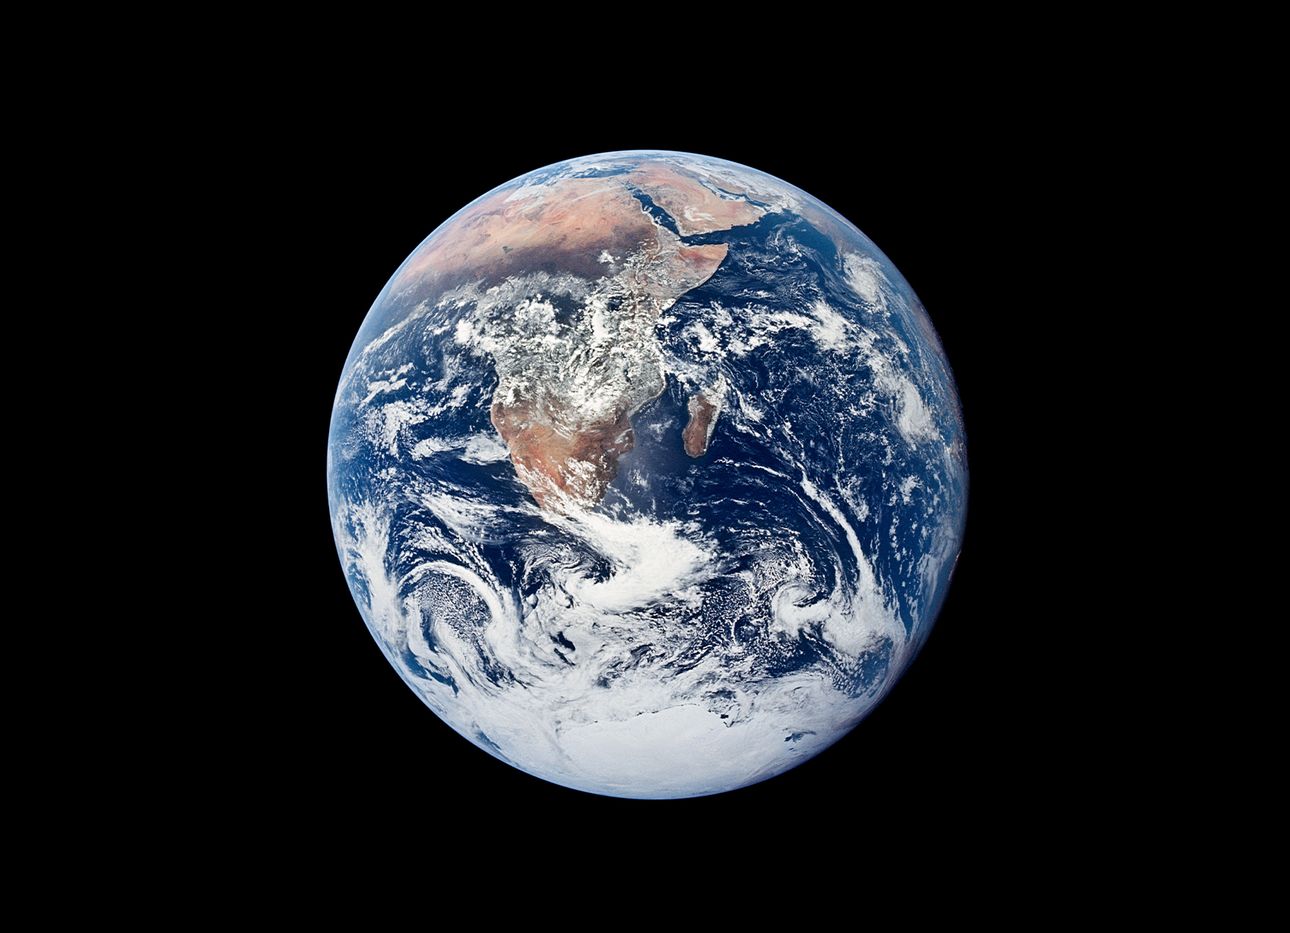 The classic “Blue Marble” image of the Earth, taken by the Apollo 17 crew on Dec. 7, 1972. (Courtesy NASA)